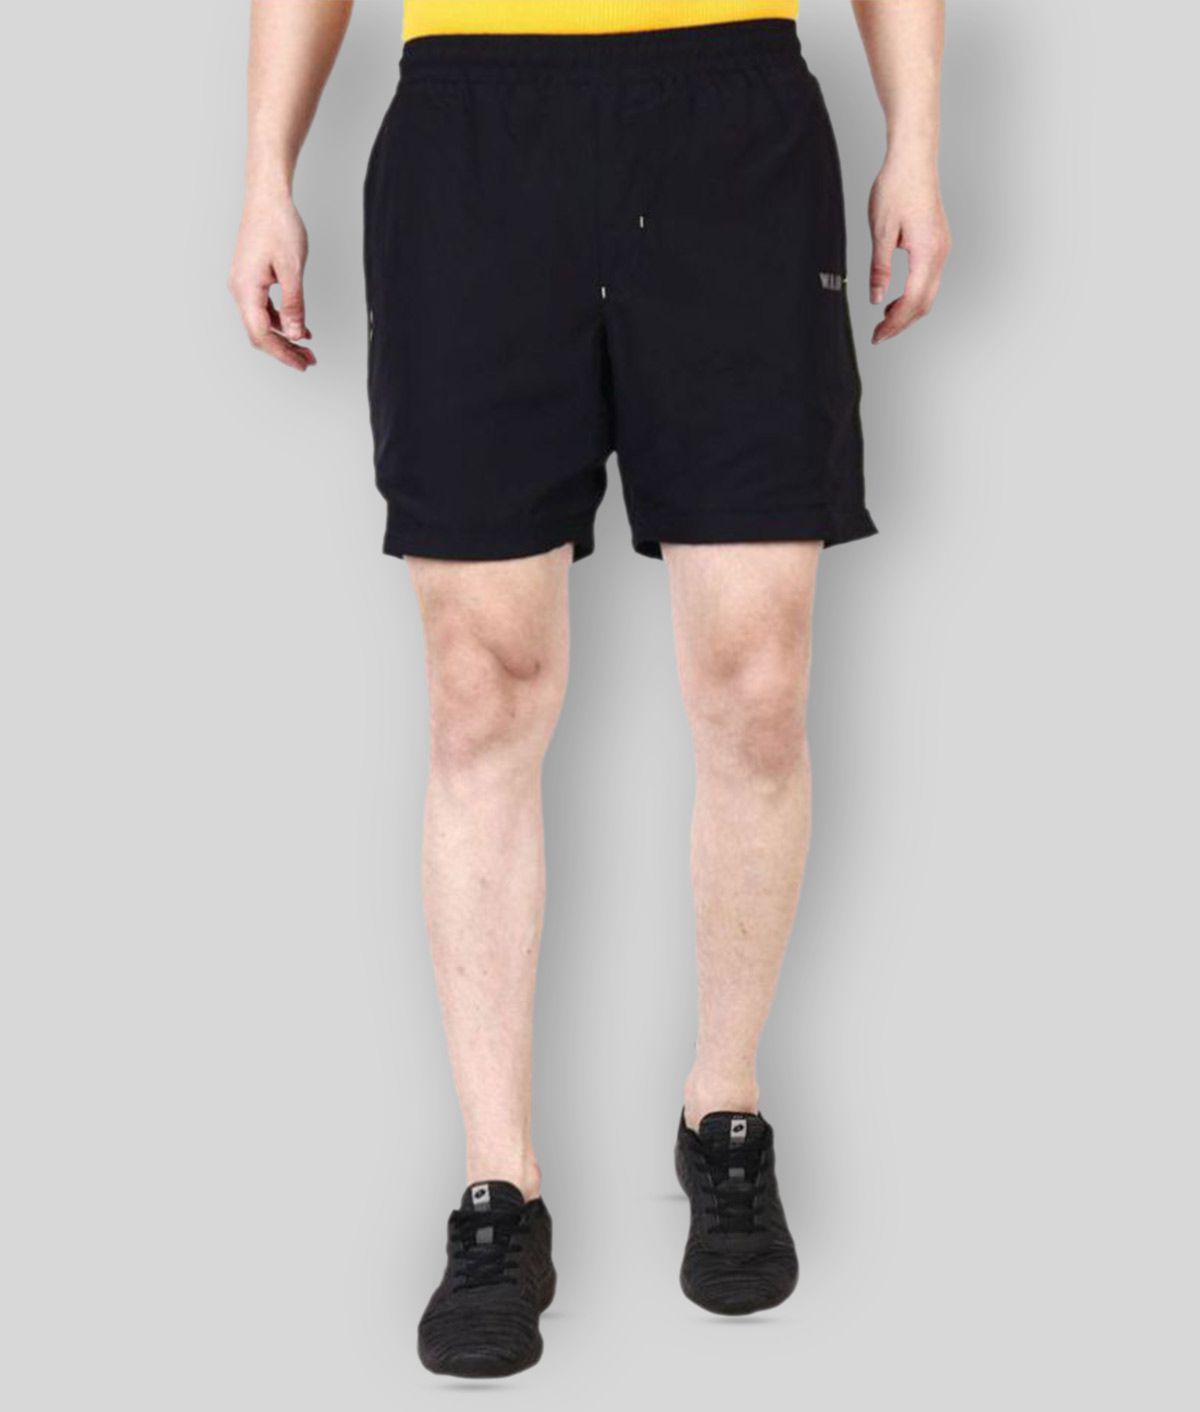 WAAW Black Polyester Outdoor & Adventure Shorts